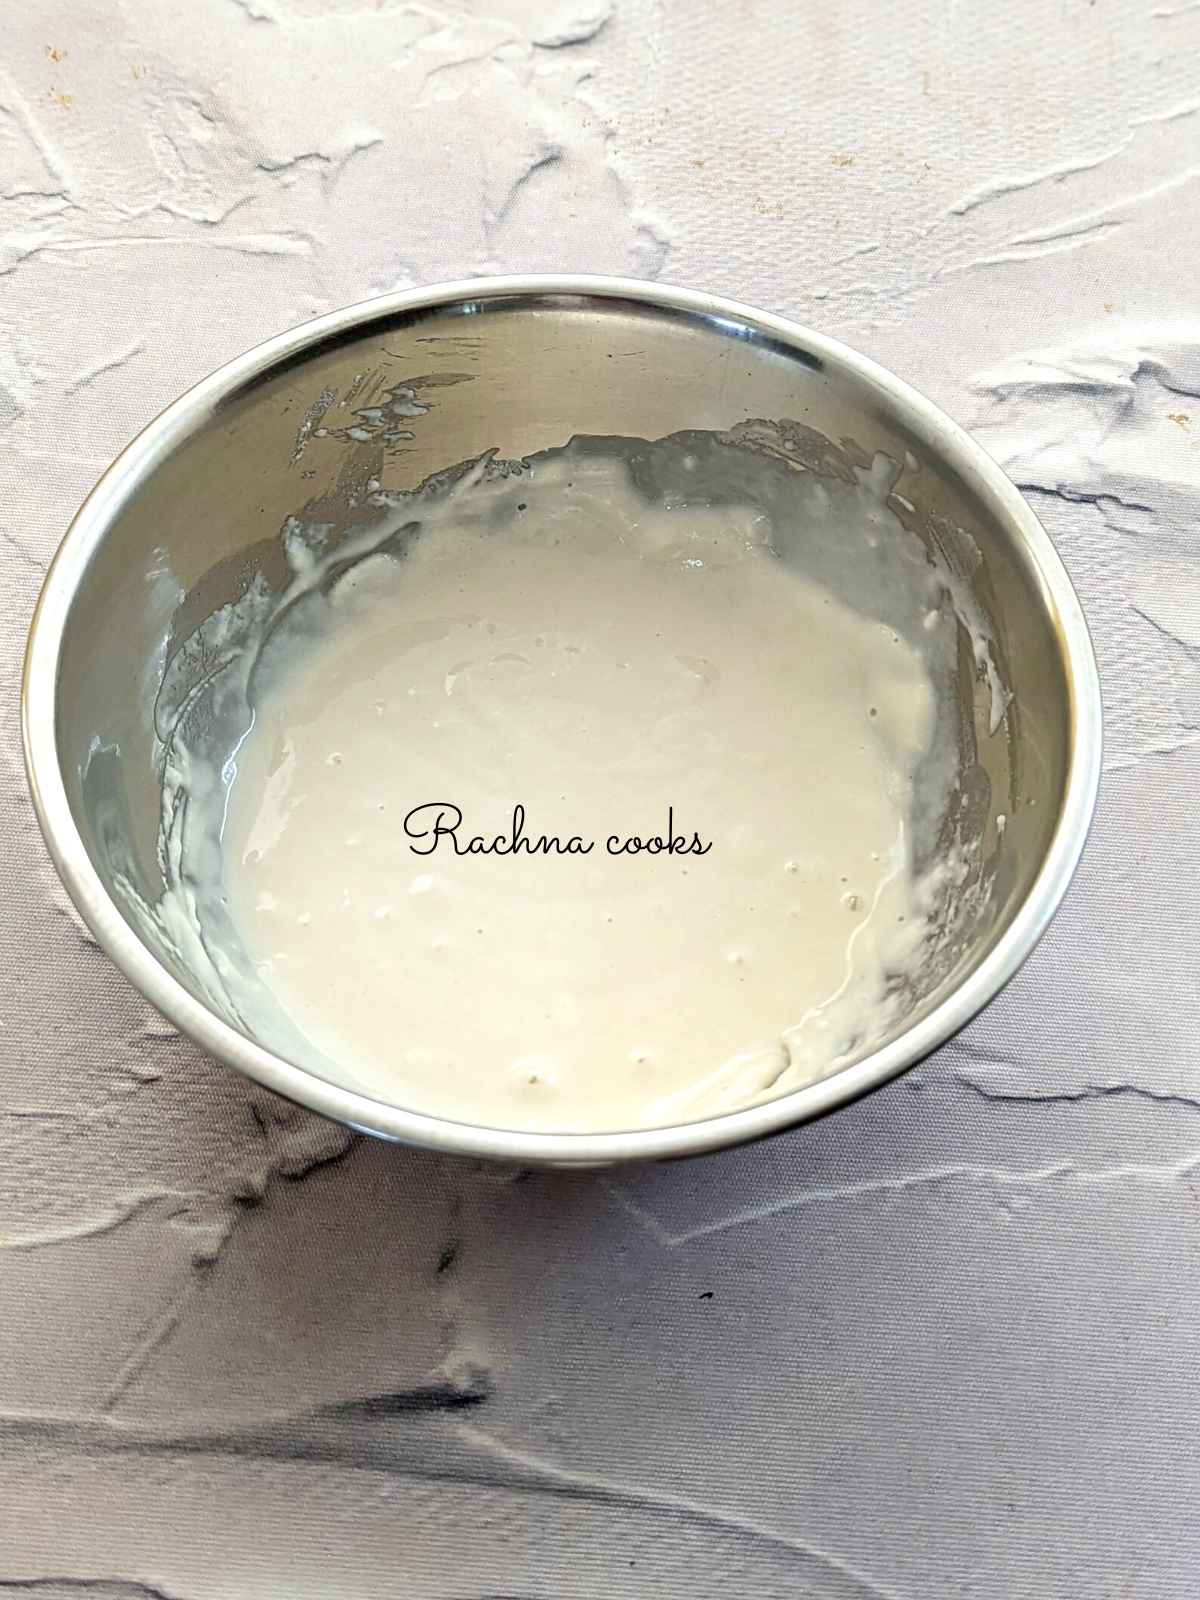 Pancake batter prepared in a shallow bowl after mixing pancake batter with water.